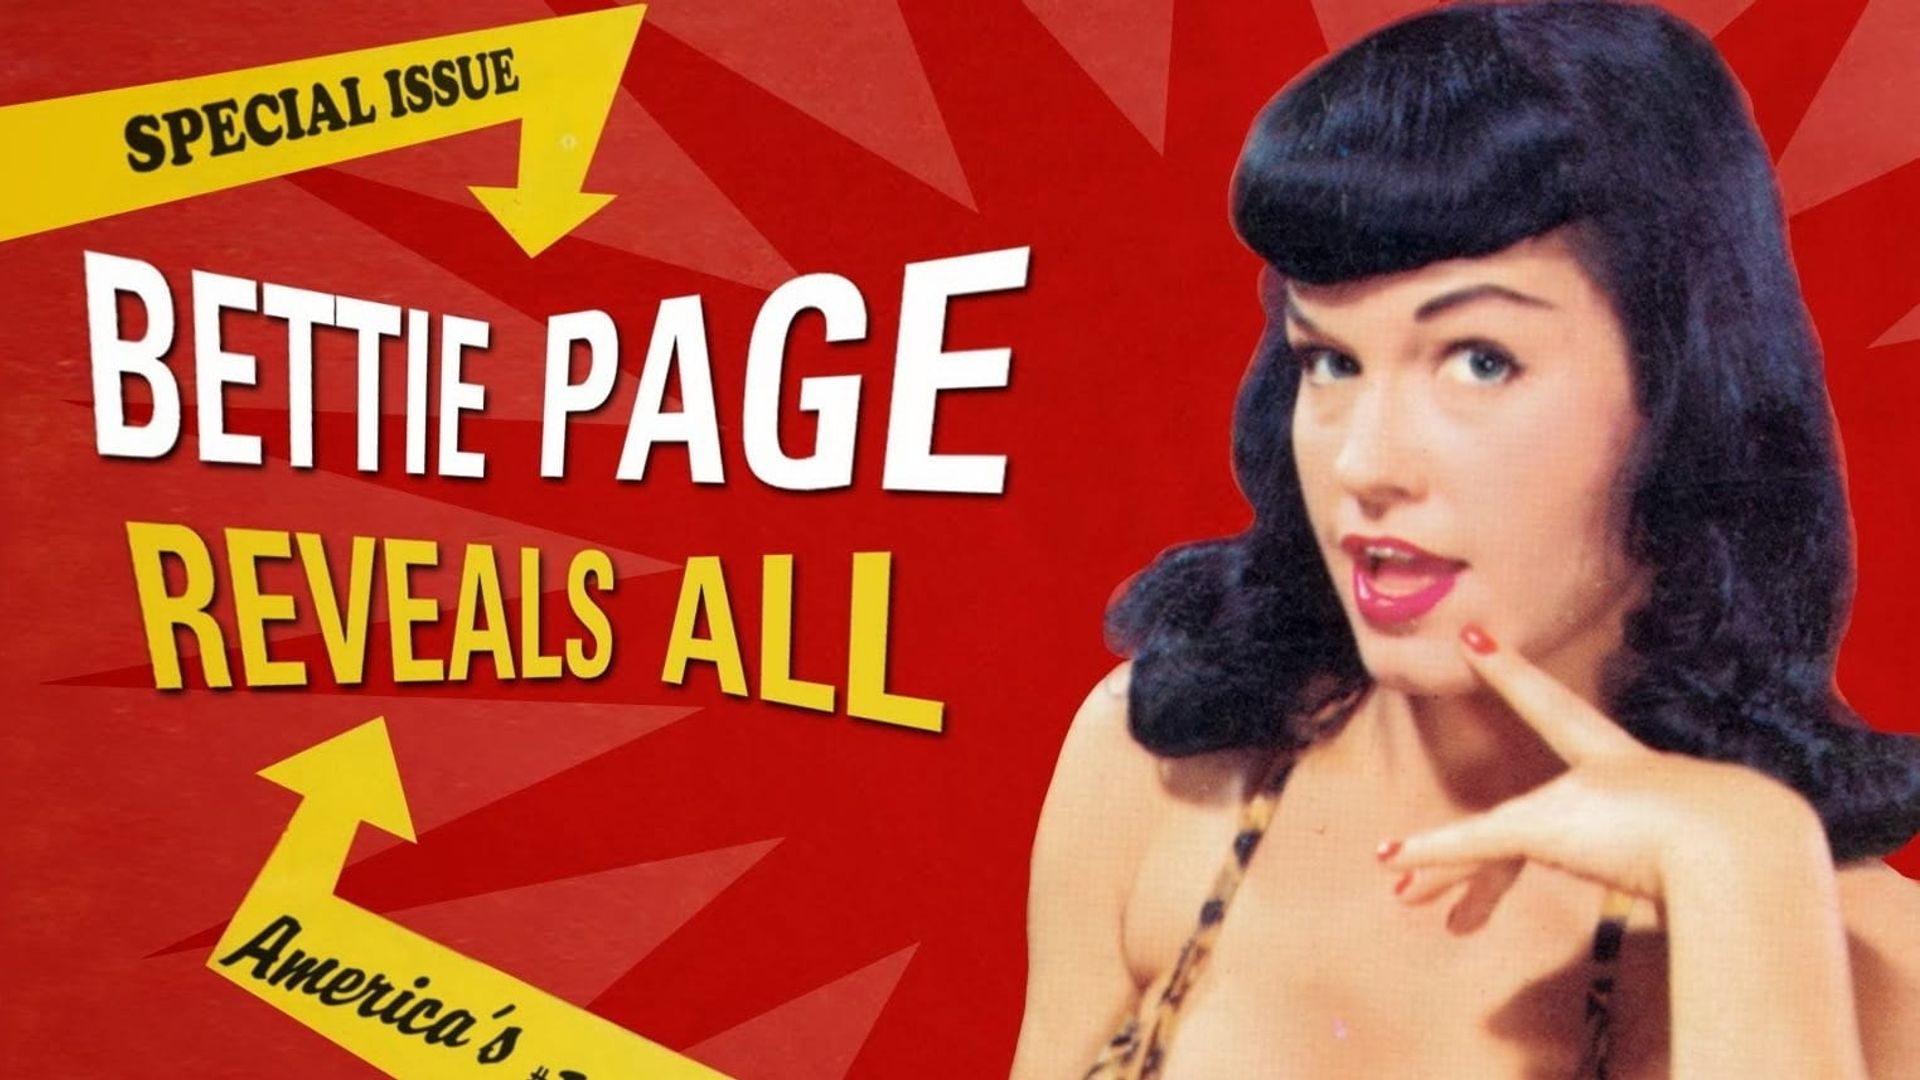 Bettie Page Reveals All background